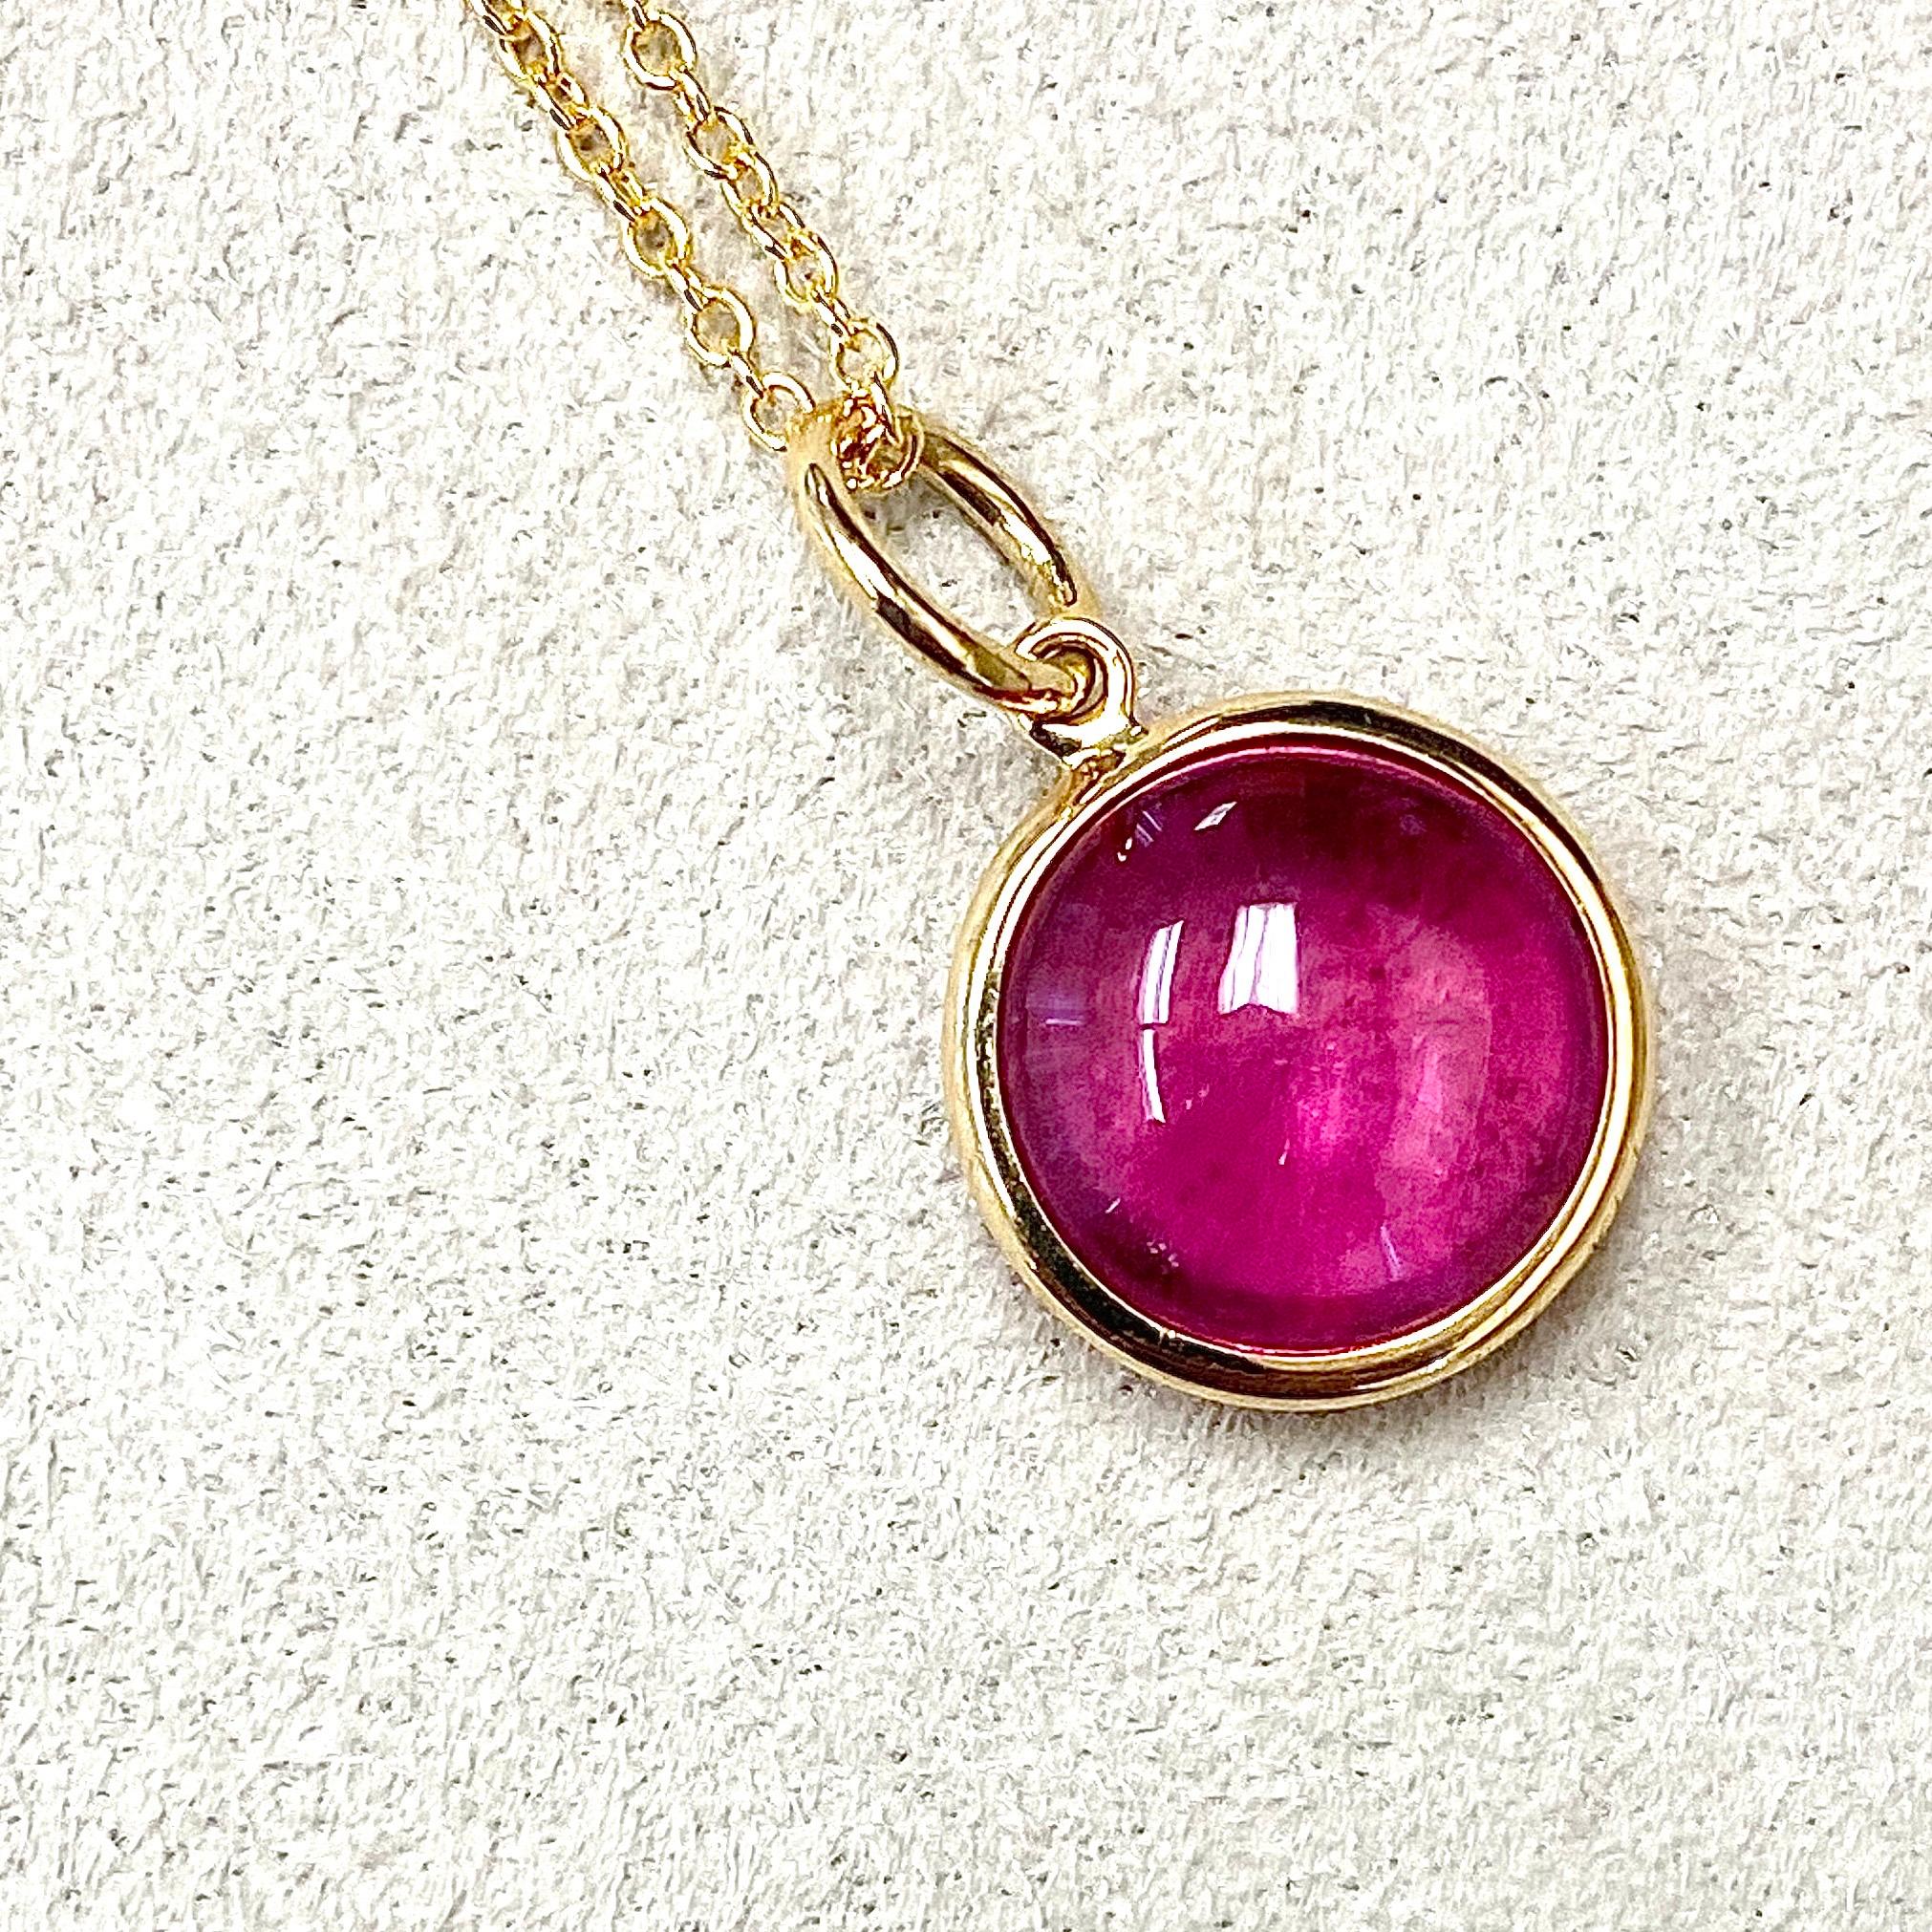 Created in 18 karat yellow gold
10 mm size charm
Rubellite 3.5 cts approx
Chain sold separately 

Formed from 18-karat yellow gold, this 10-millimetre-sized ornament is adorned with a gleaming 3.5-carat rubellite, while its matching chain is sold